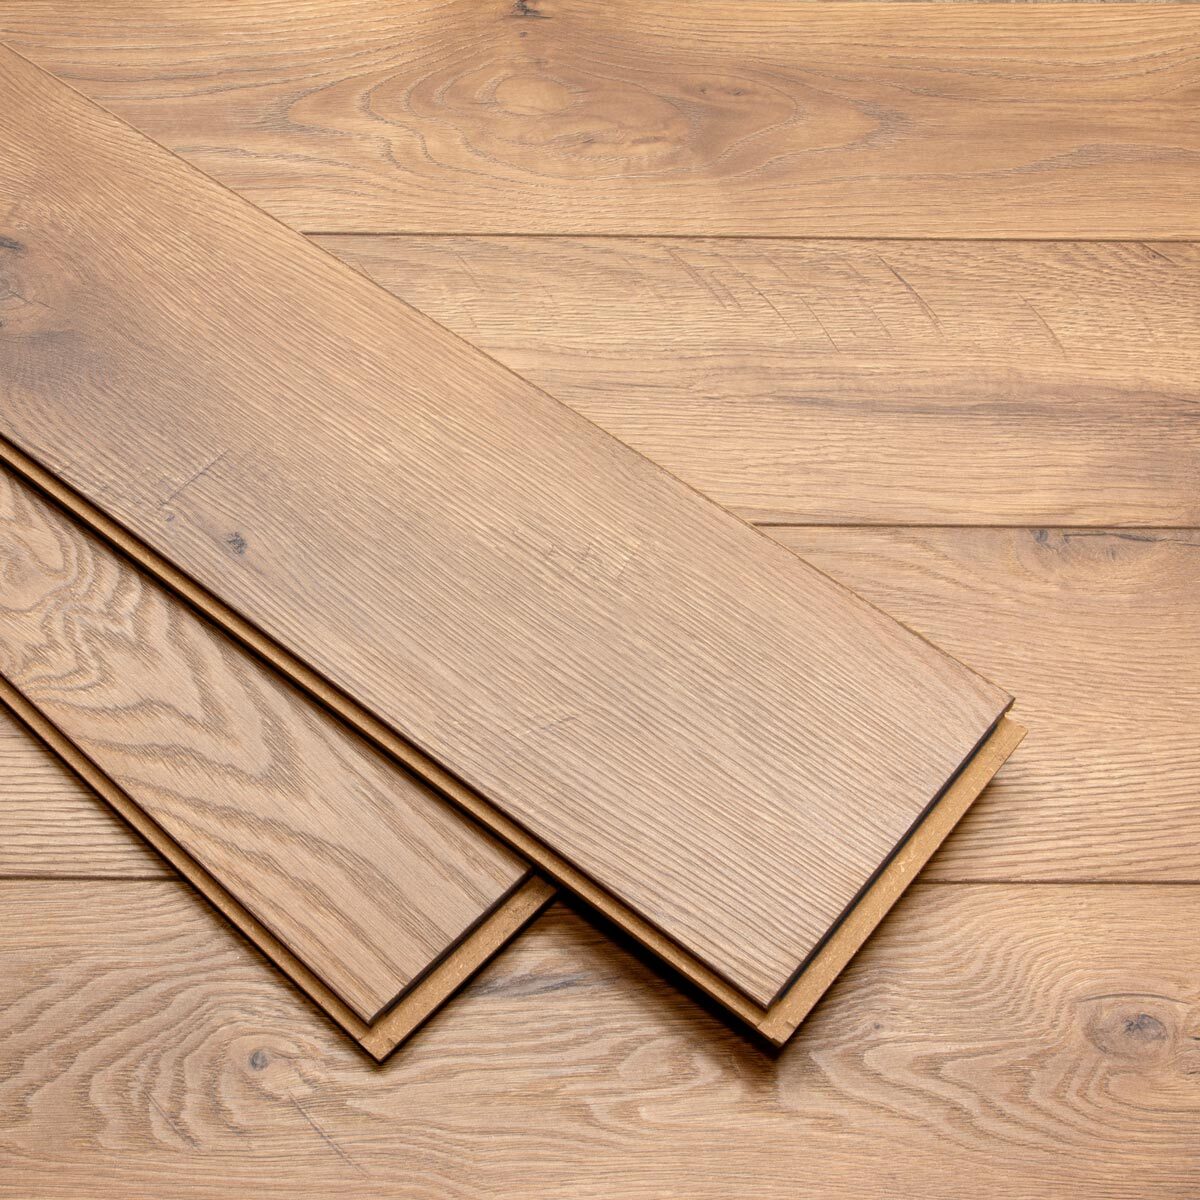 Close up image of flooring with two loose planks